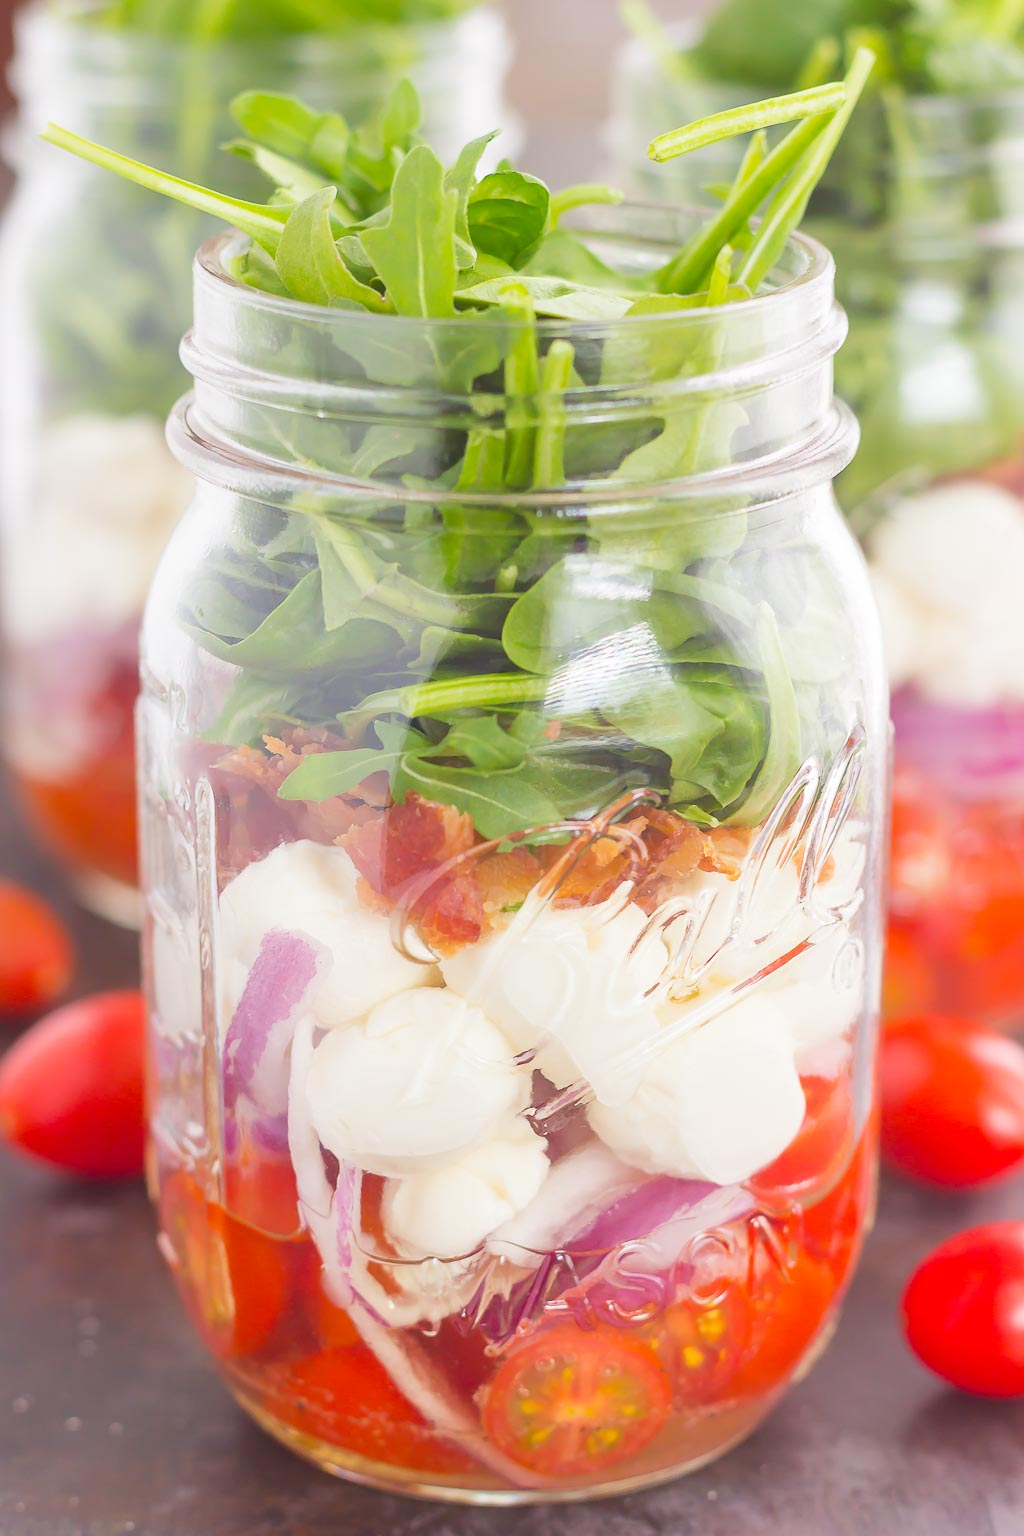 Caprese Mason Jar Salad makes a deliciously easy meal that's perfect for just about any day. Classic caprese ingredients are layered in a mason jar, along with some red onion and crisp bacon for extra flavor. Great for meal prepping and perfect as a grab-n-go lunch, you'll love the ease and taste of this classic salad that's fun to make and even better to eat!